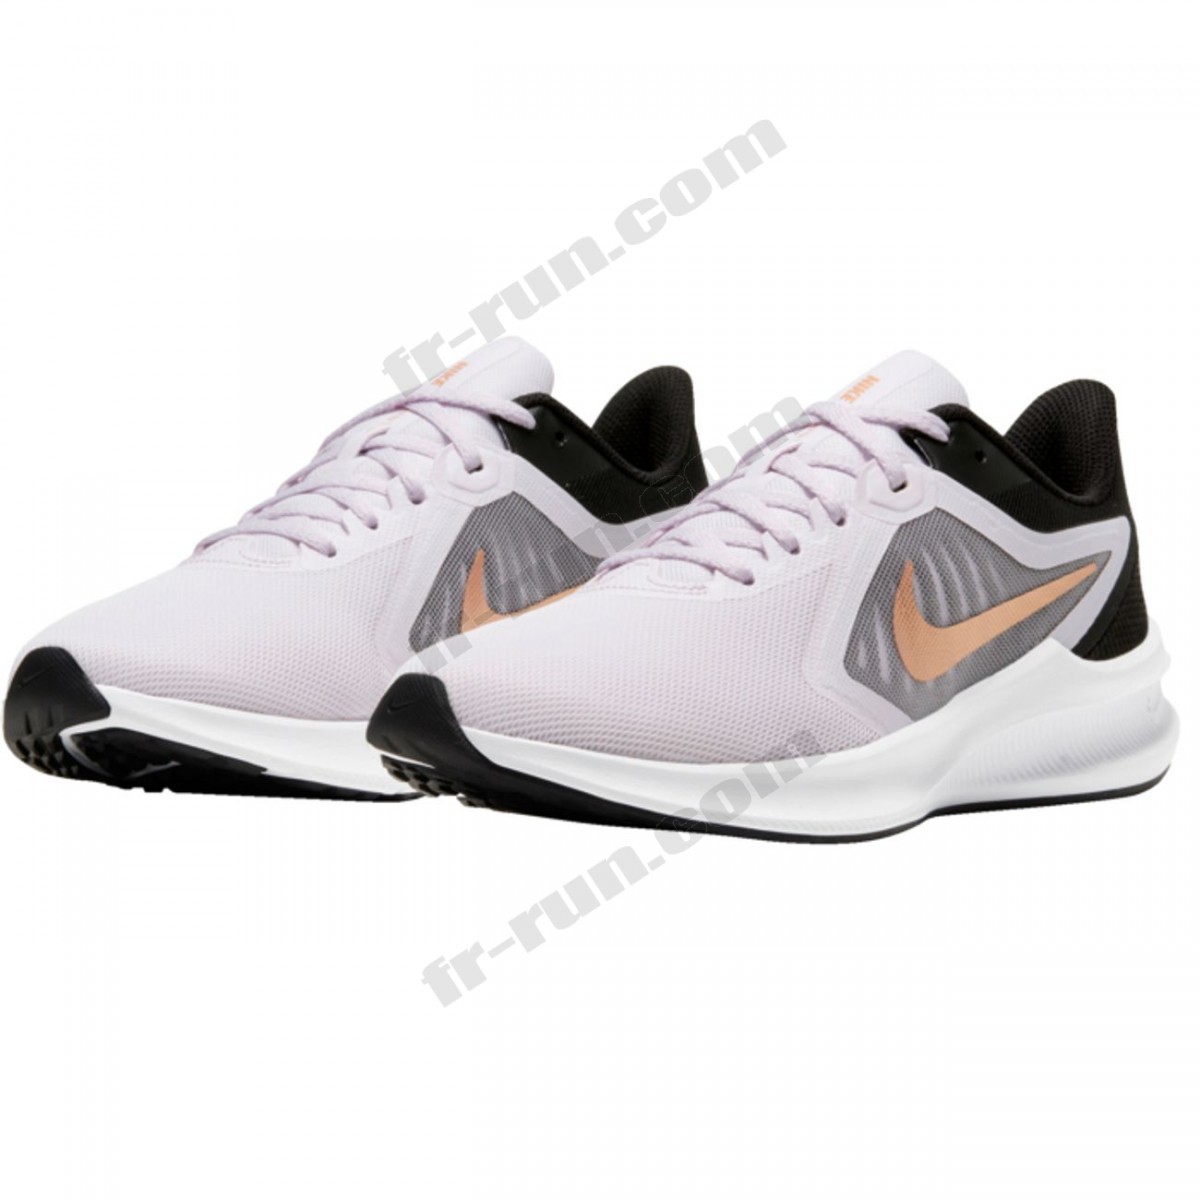 Nike/CHAUSSURES BASSES running femme NIKE NIKE DOWNSHIFTER 10 W √ Nouveau style √ Soldes - -3